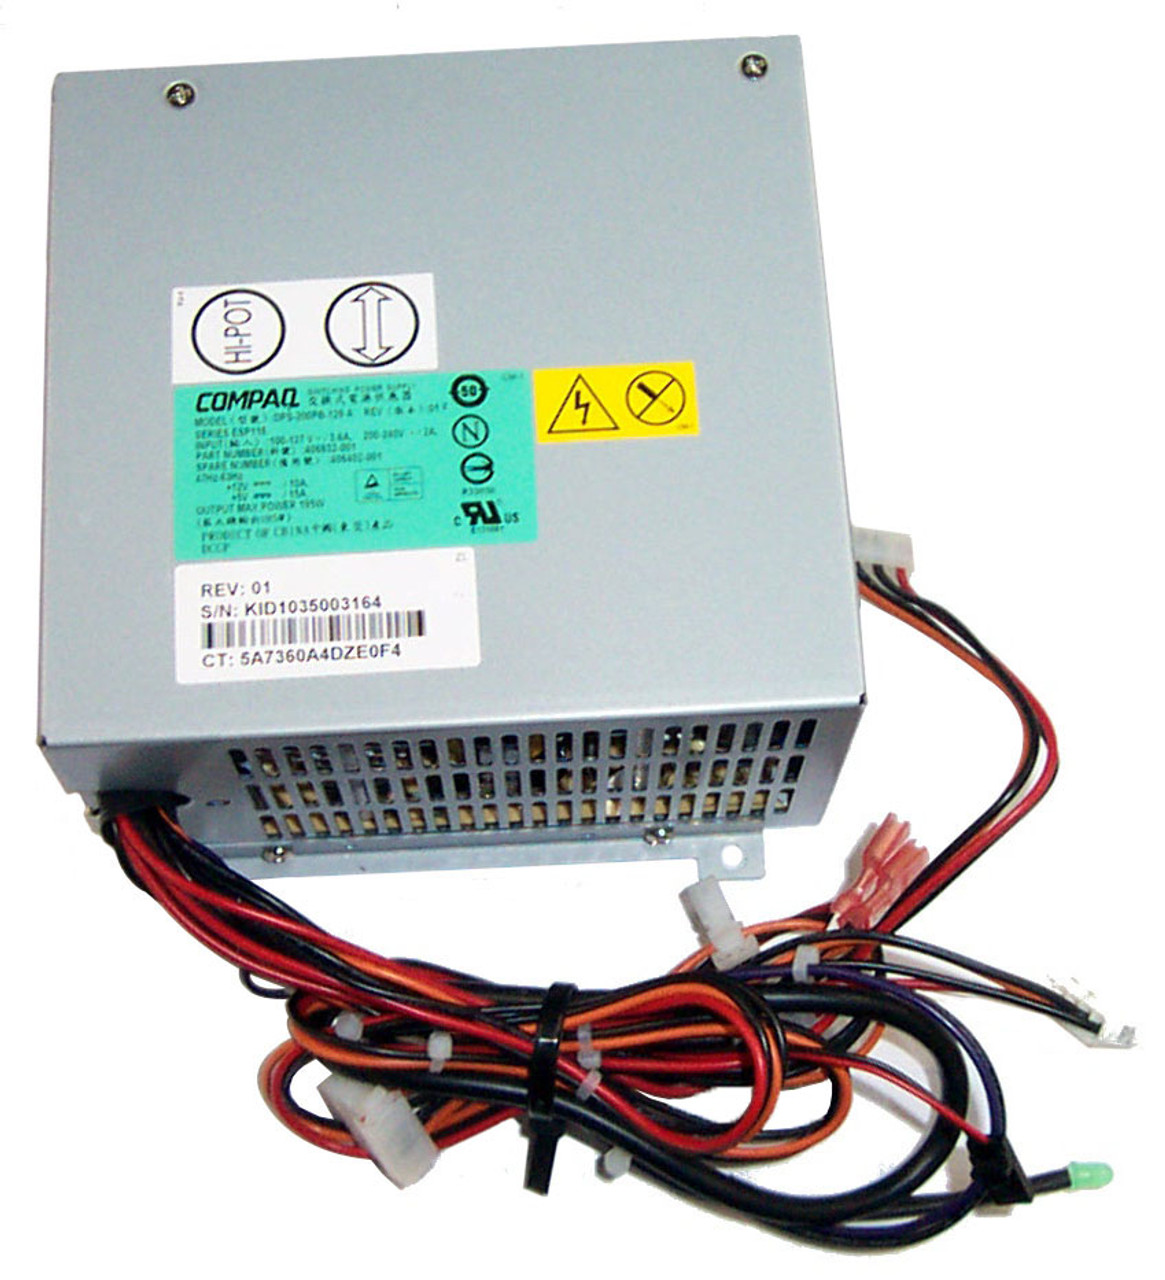 DPS-200PB-126 HP 200-Watts AC ATX Power Supply with Active PFC for Vectra VL400